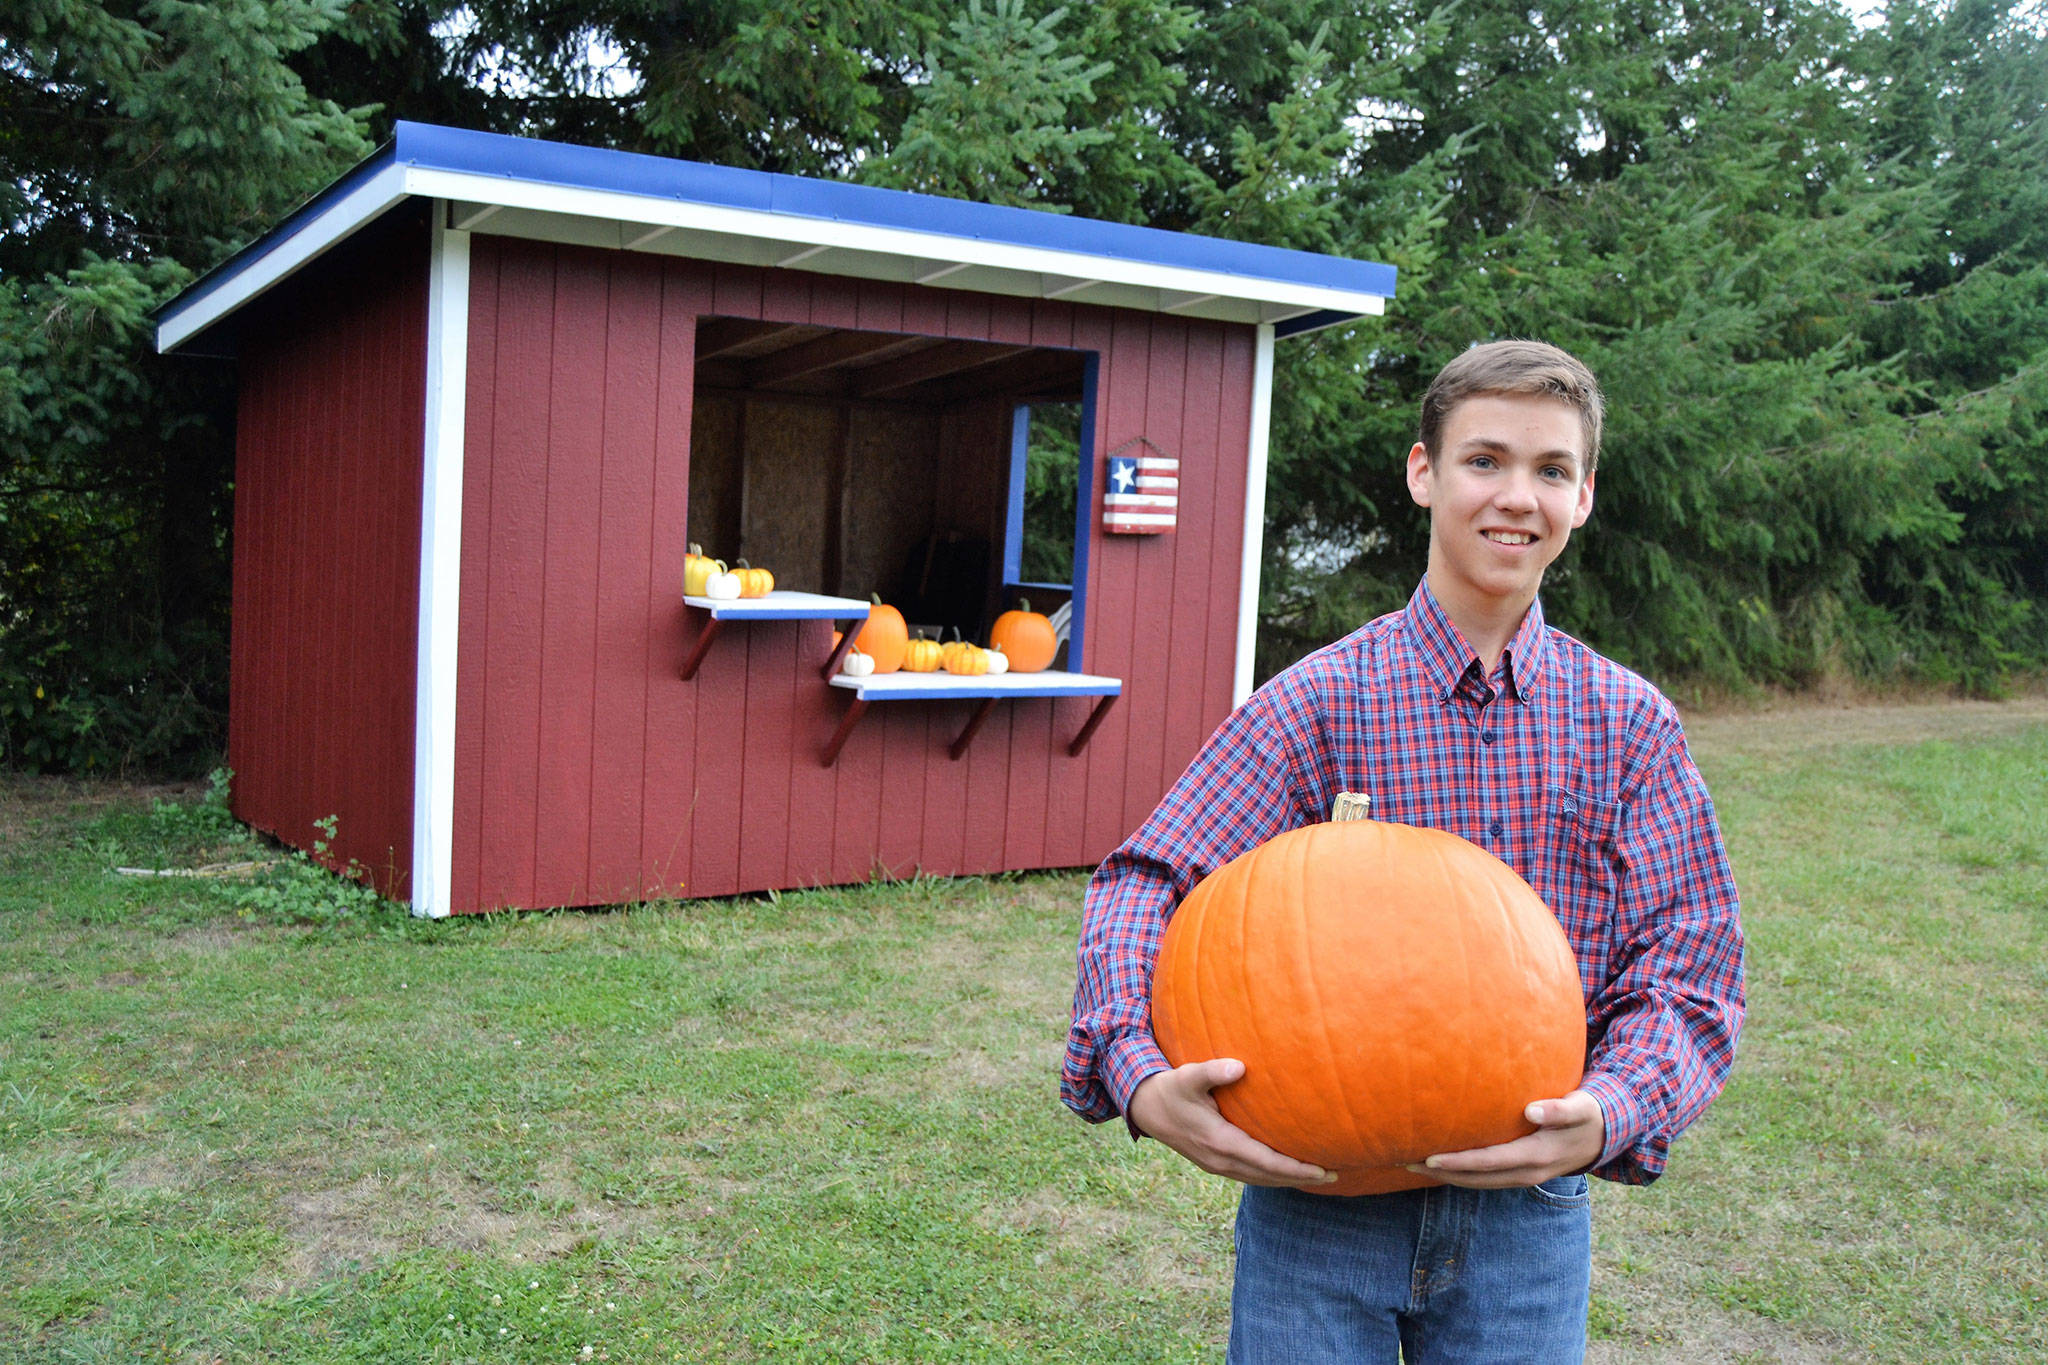 Carson Holt plans to sell pumpkins on Oct. 21 at the intersection of Old Olympic Highway and Knutsen Farm Road to benefit the Captain Joseph House Foundation and Dungeness Composite Squad Civil Air Patrol. He is going to sell the pumpkins out of the former Cameron’s Berry Farm sale stand that was gifted to him. Sequim Gazette photo by Matthew Nash